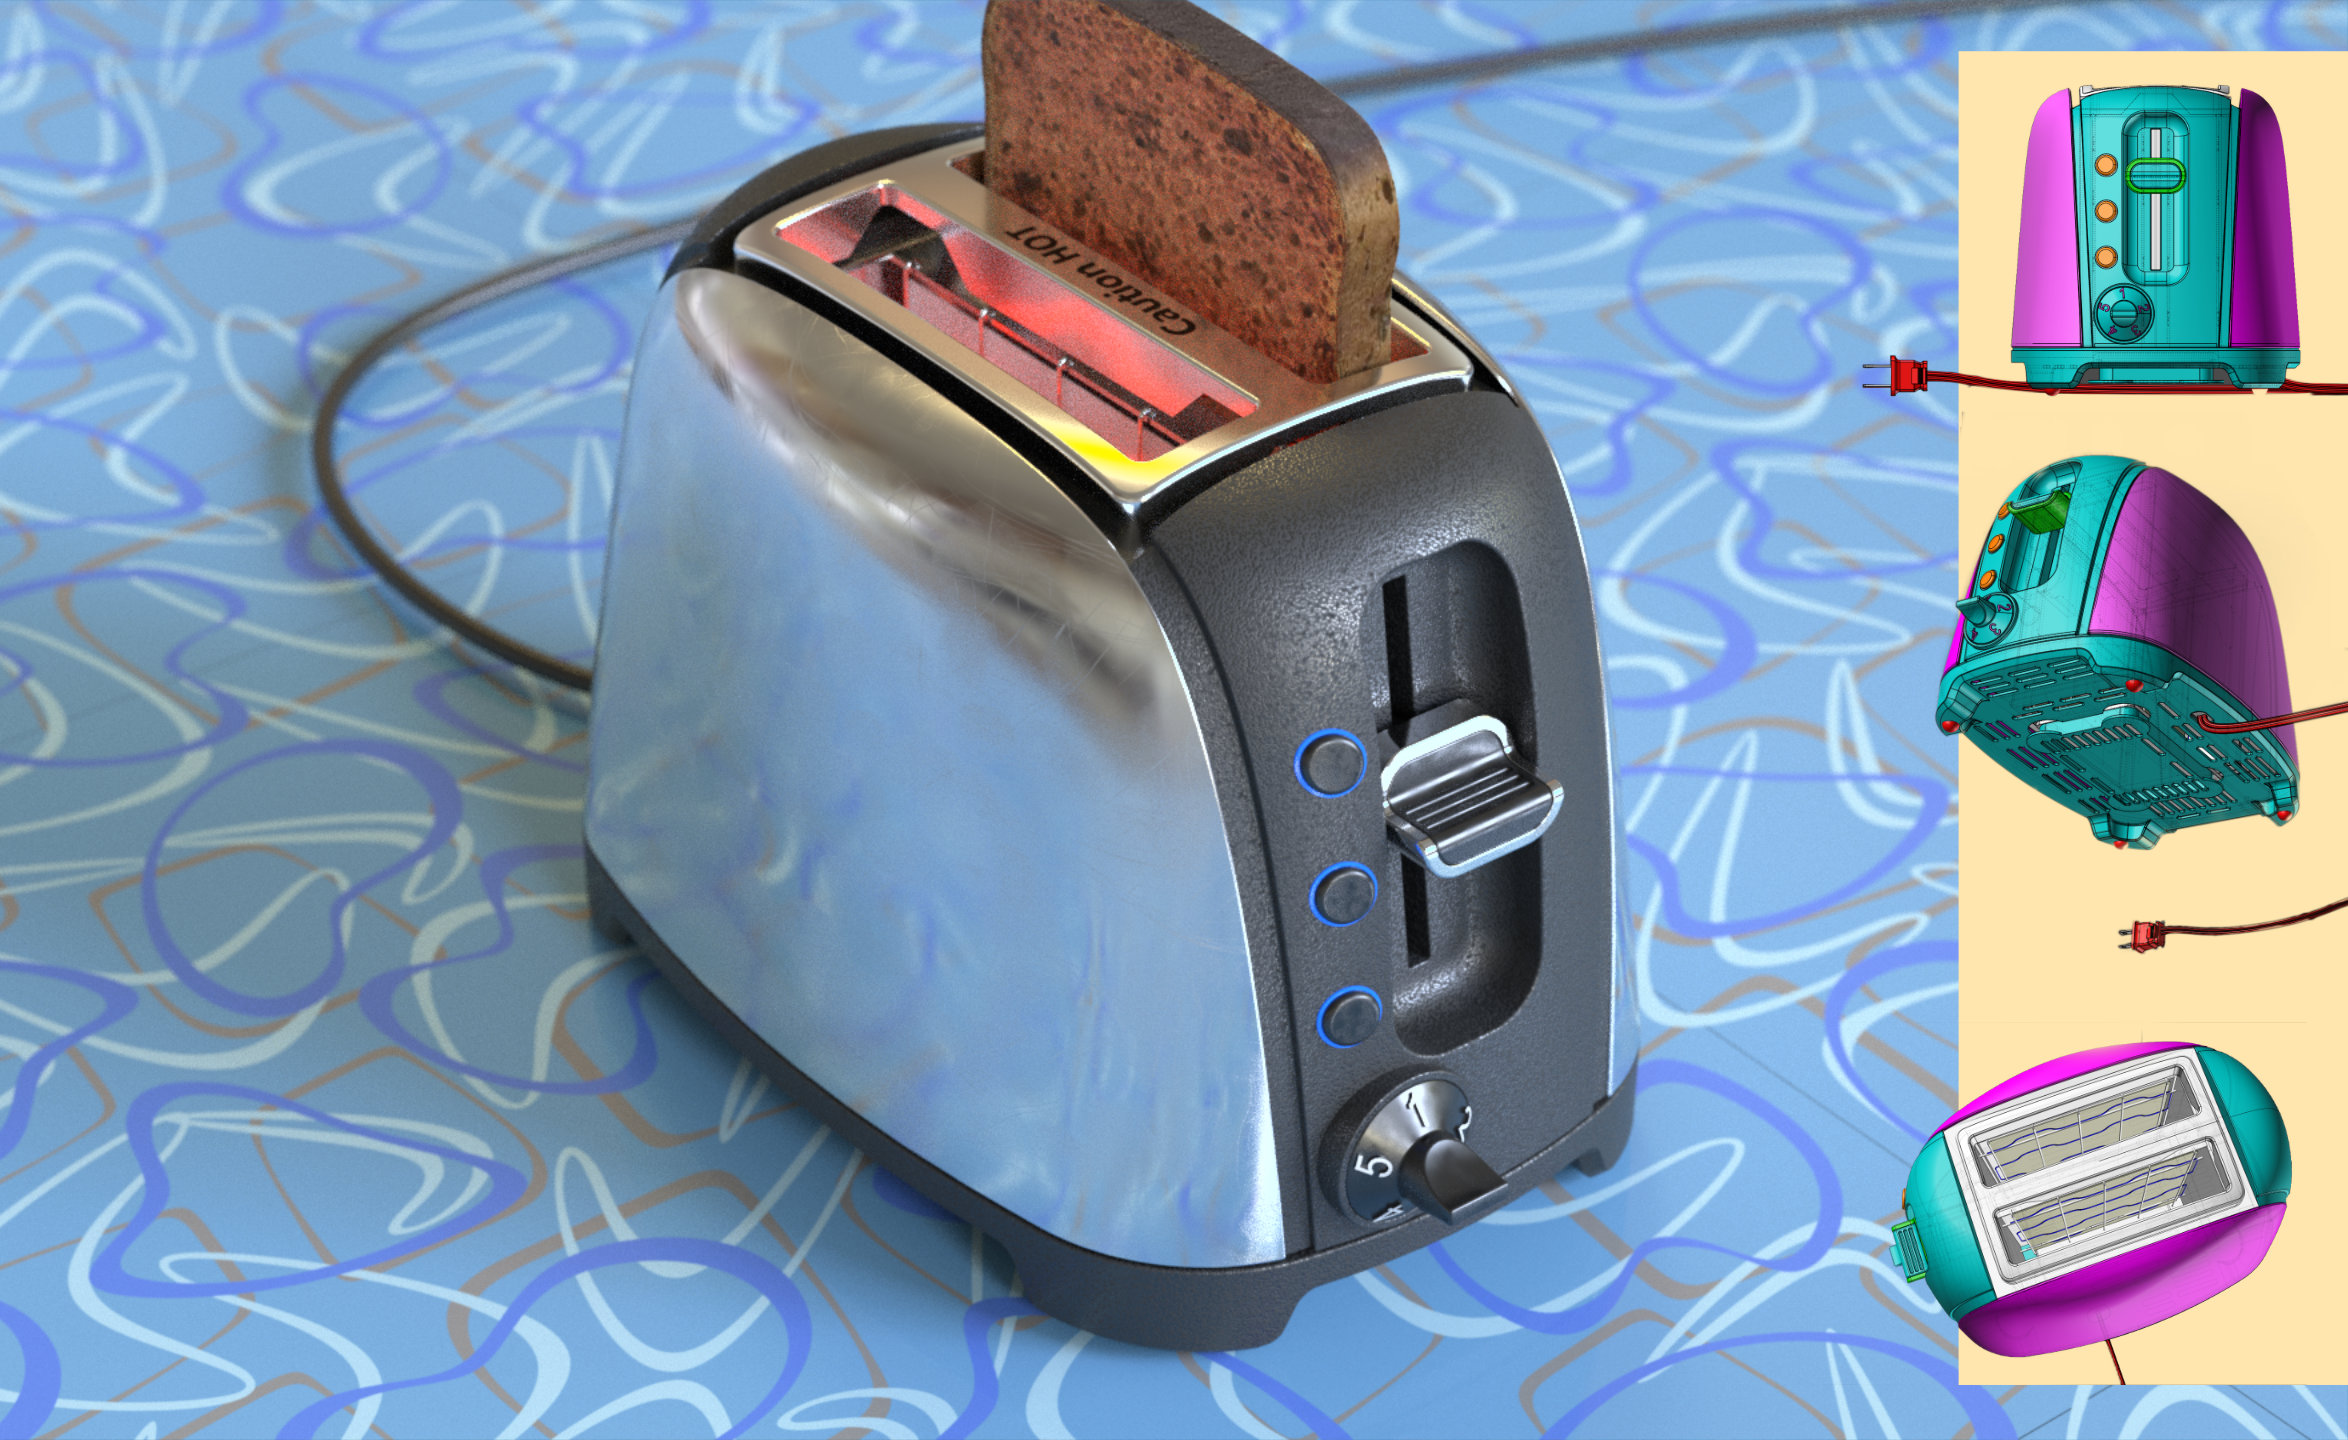 solid model of a toaster and rendering